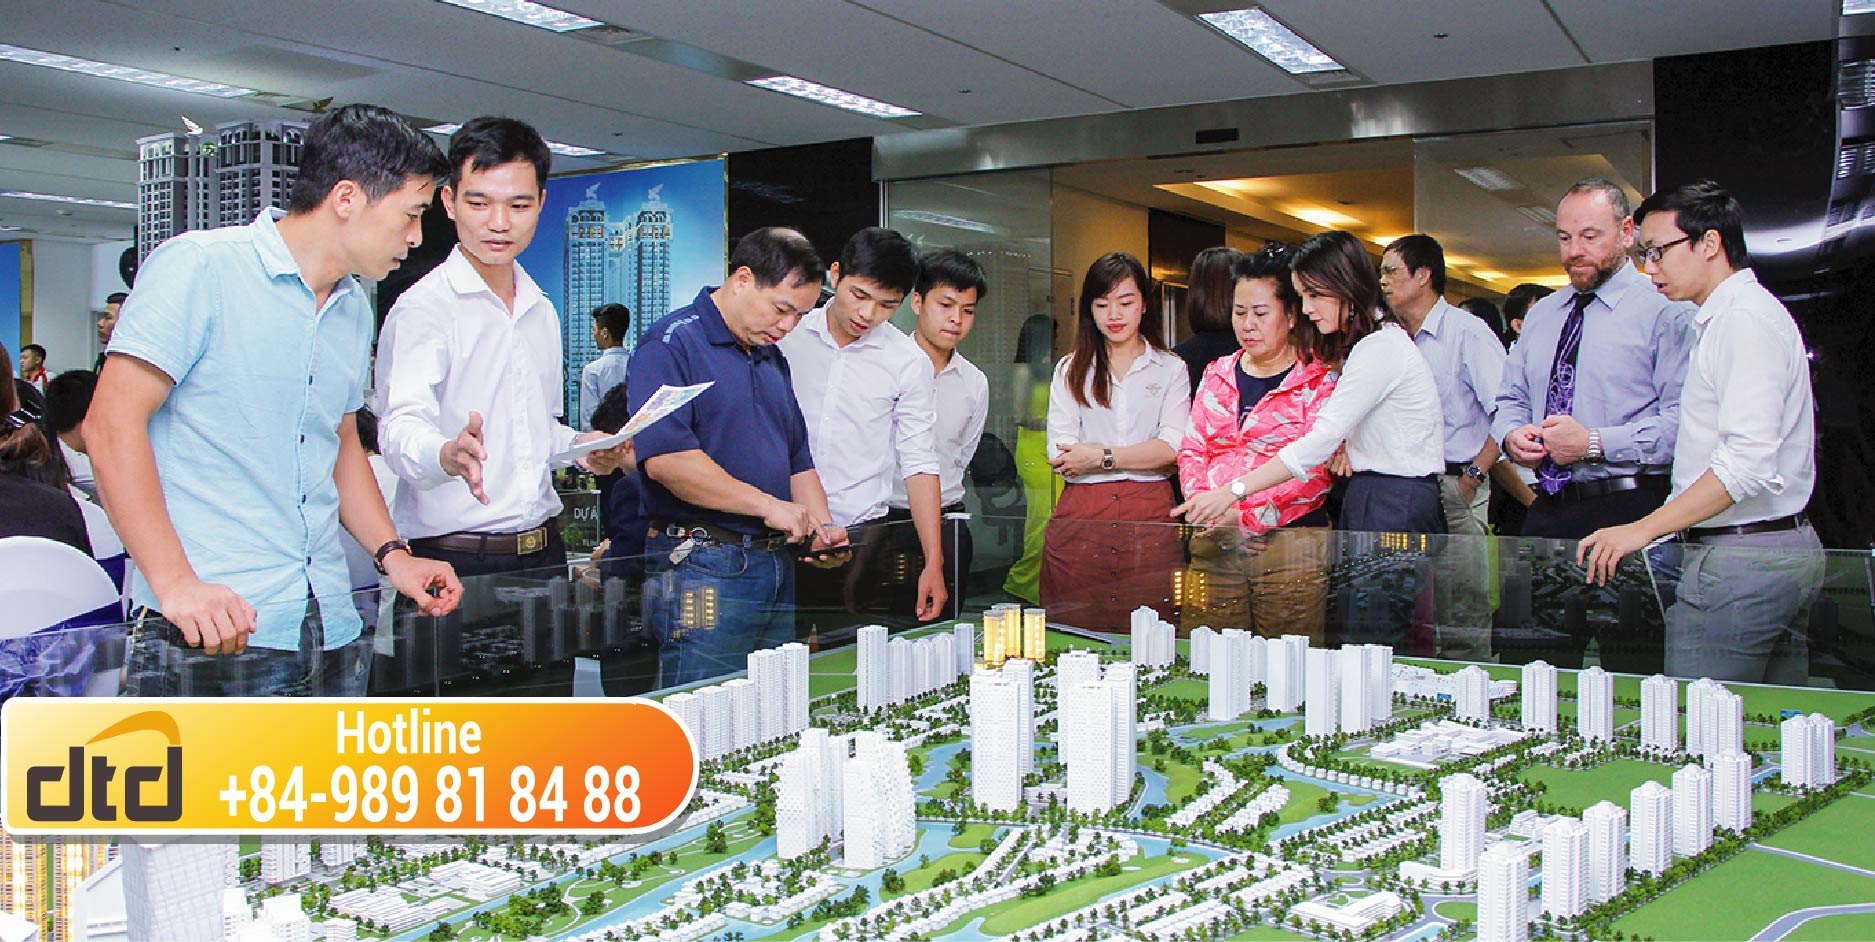 LEGAL GUIDE TO BUYING OFF-PLAN PROPERTY, LESSON FROM THE ALIBABA REAL ESTATE CASE!